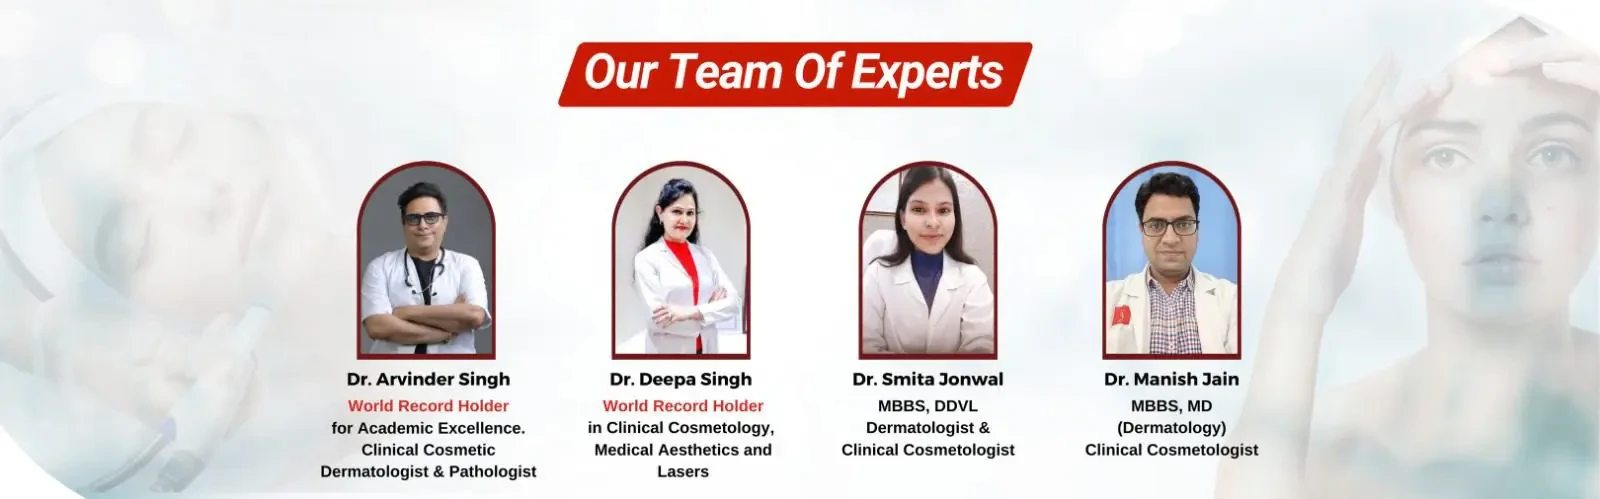 Cosmetologist in Udaipur, Cosmetic dermatologist in Udaipur, Skin Specialist in Udaipur, Best Dermatologist in Udaipur, Skin Treatment in Udaipur, Arth Skinn & Fitness